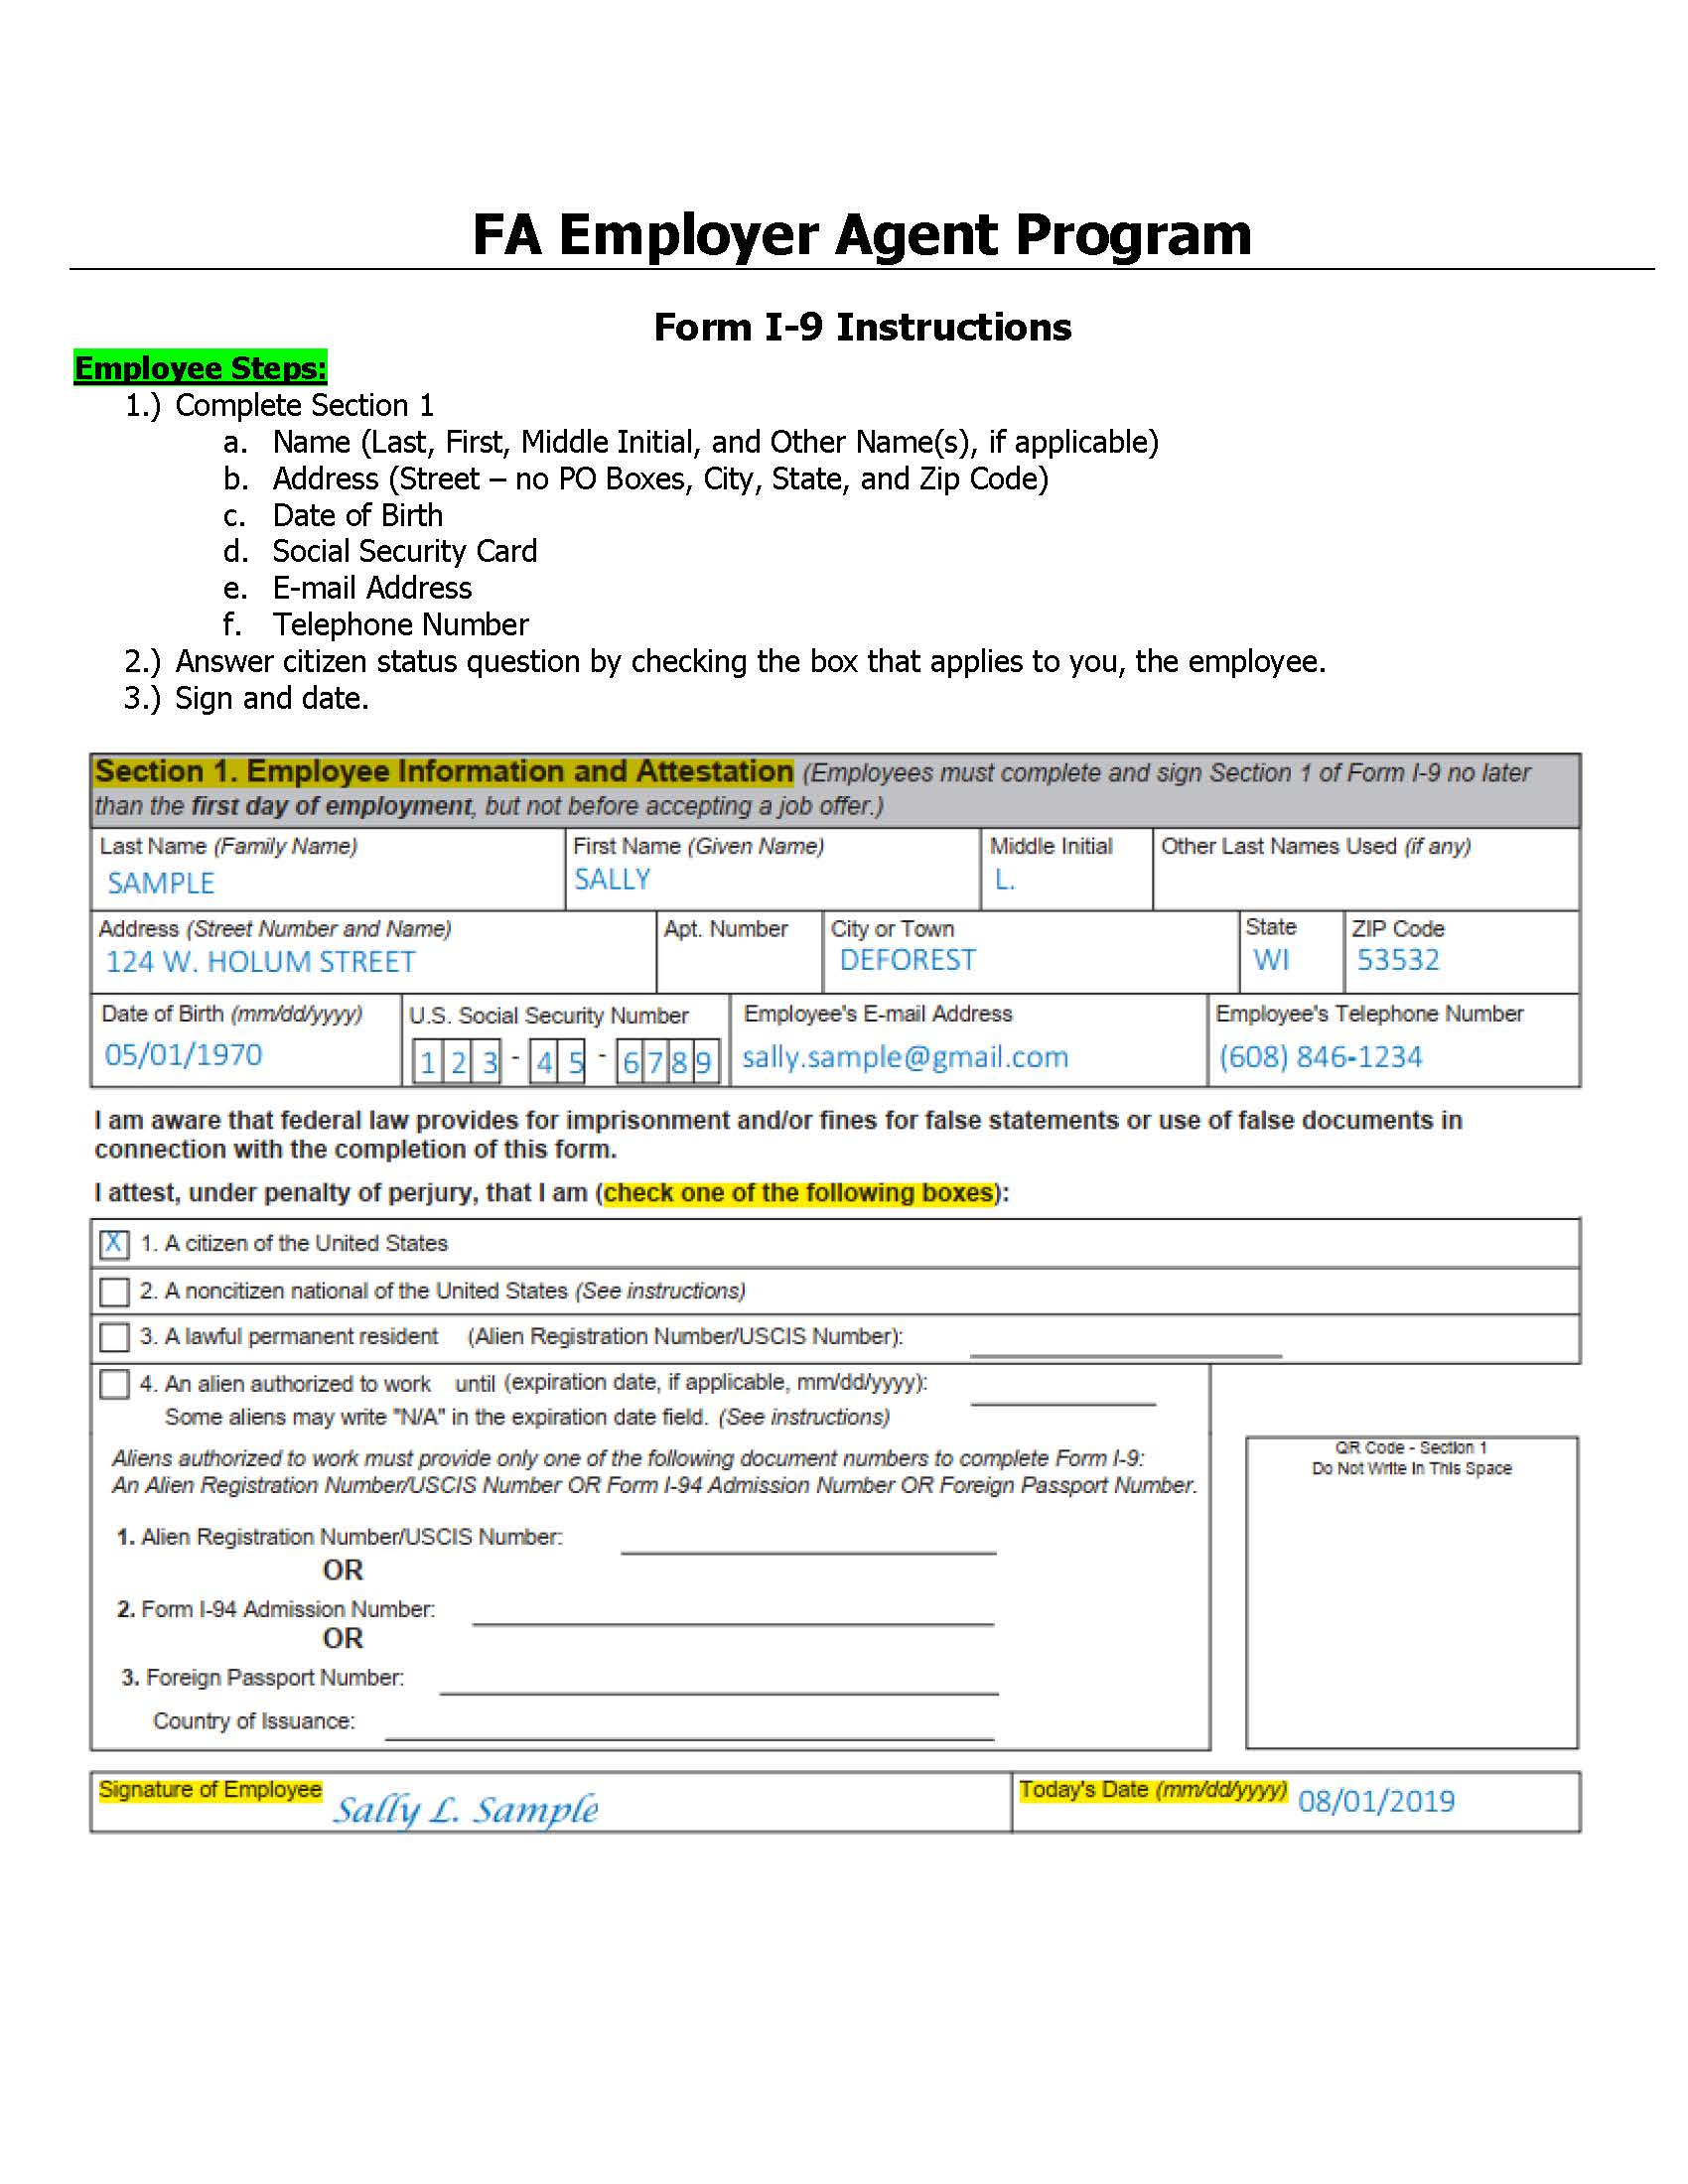 Employer Agent Forms | Fiscal Assistance